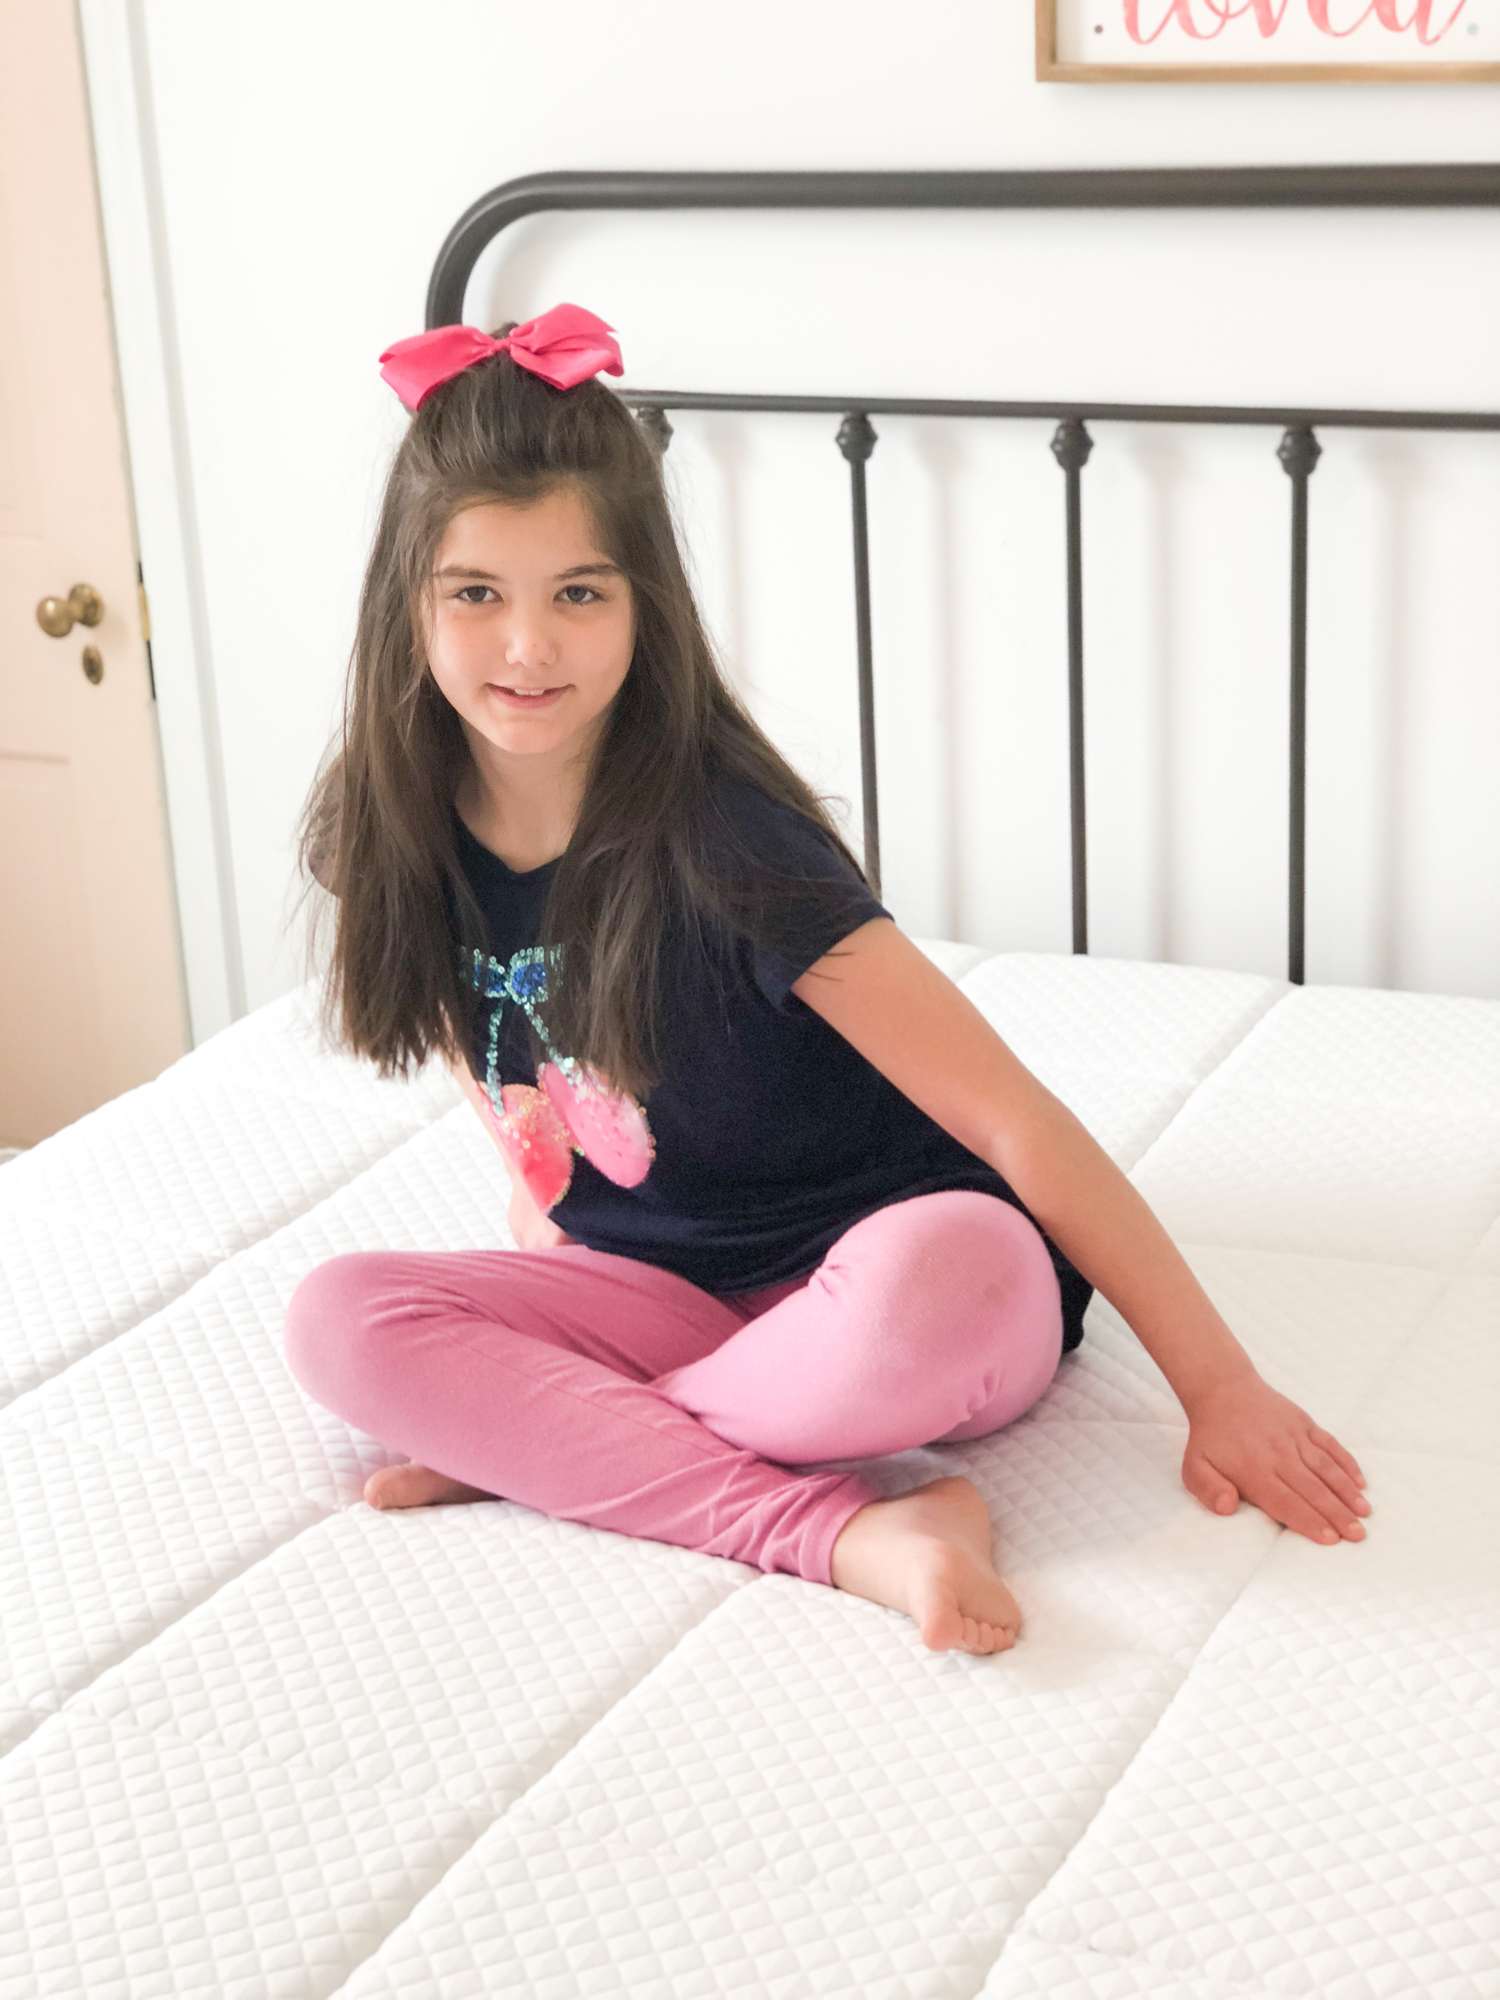 Sania’s New Nectar Mattress! {Enter my giveaway to win your own mattress!}